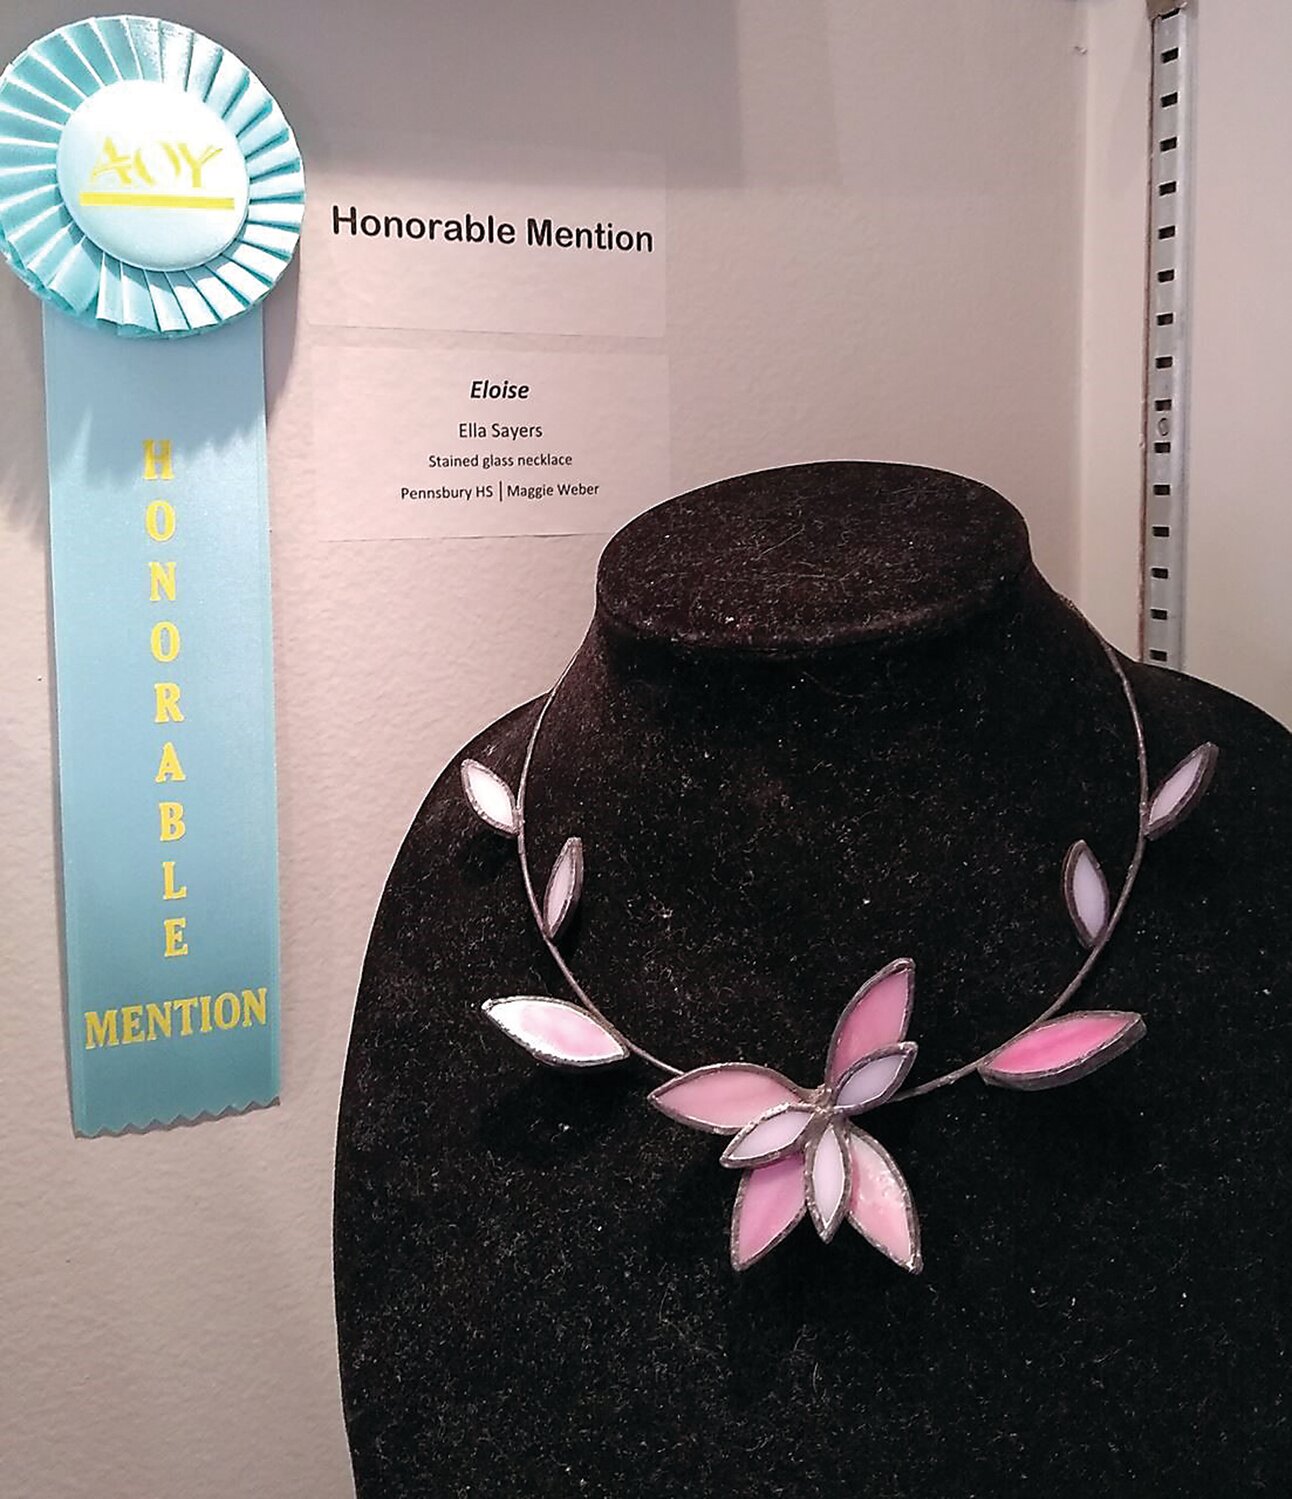 Honorable Mention “Eloise” by Ella Sayers of Pennsbury High School is a necklace in stained glass.